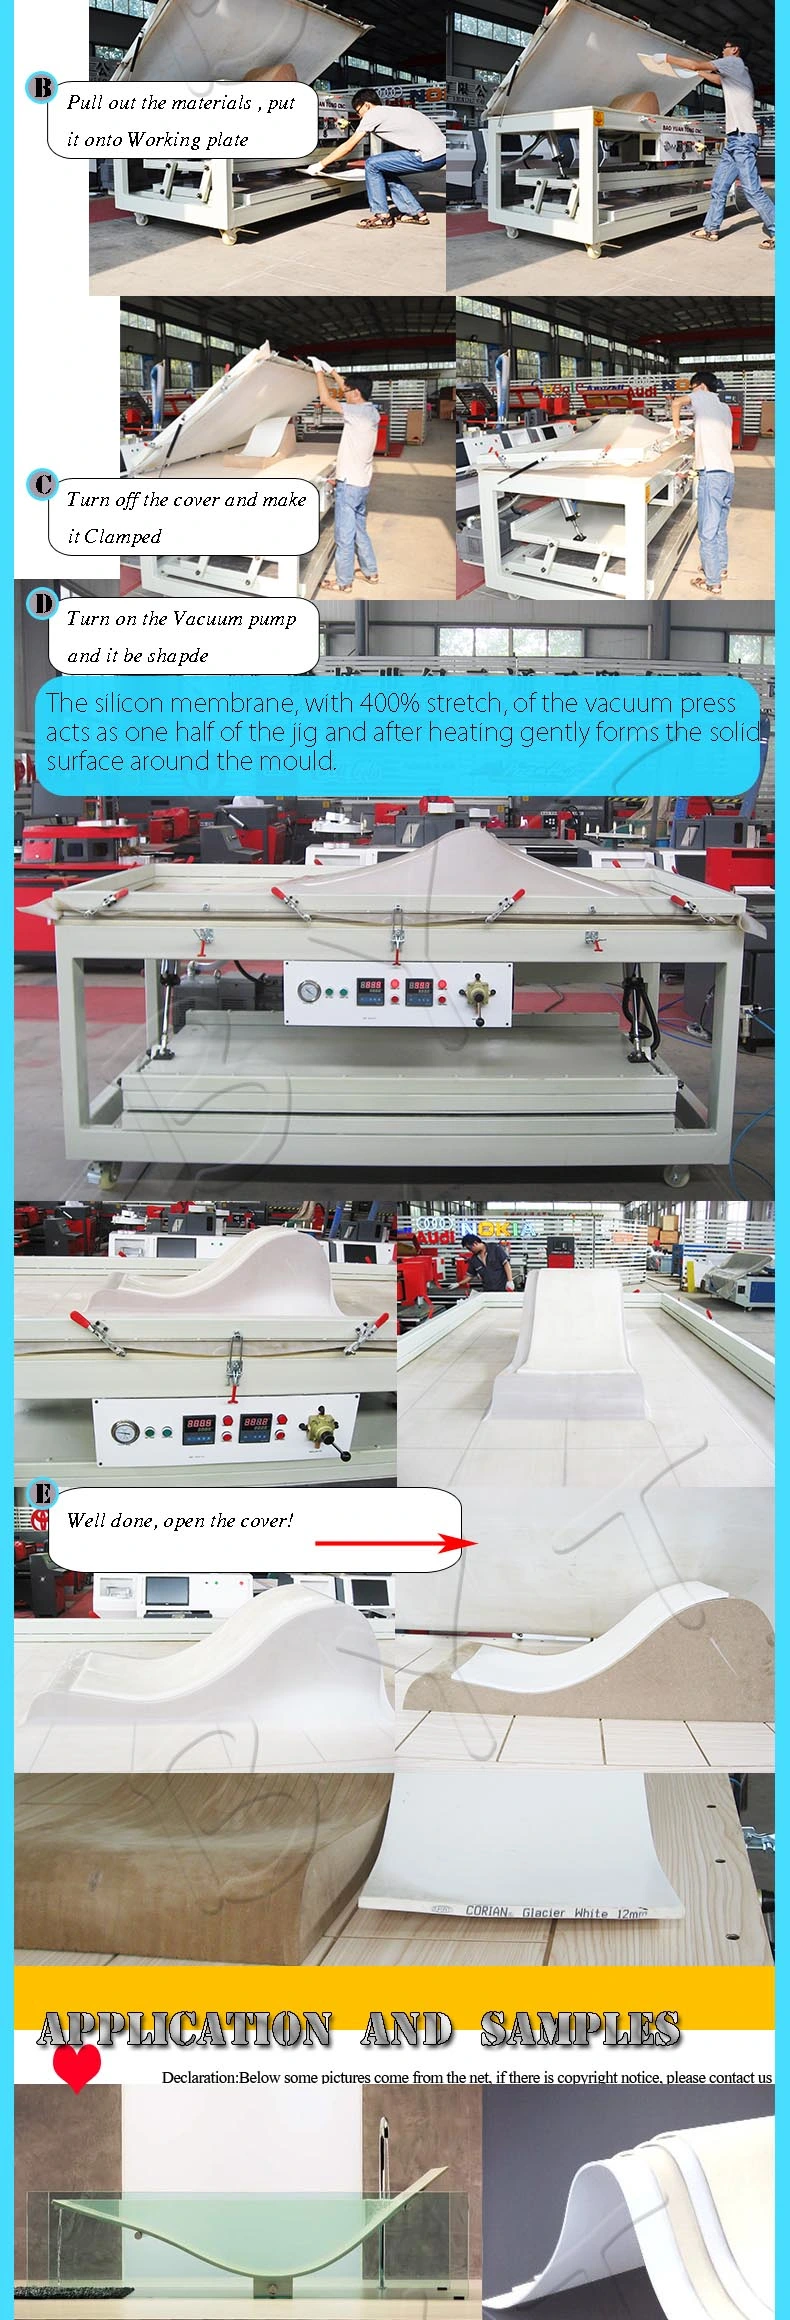 Bsf Acrylic Plastic Vacuum Thermo Former/Membrane Vacuum Forming Machine for Corian